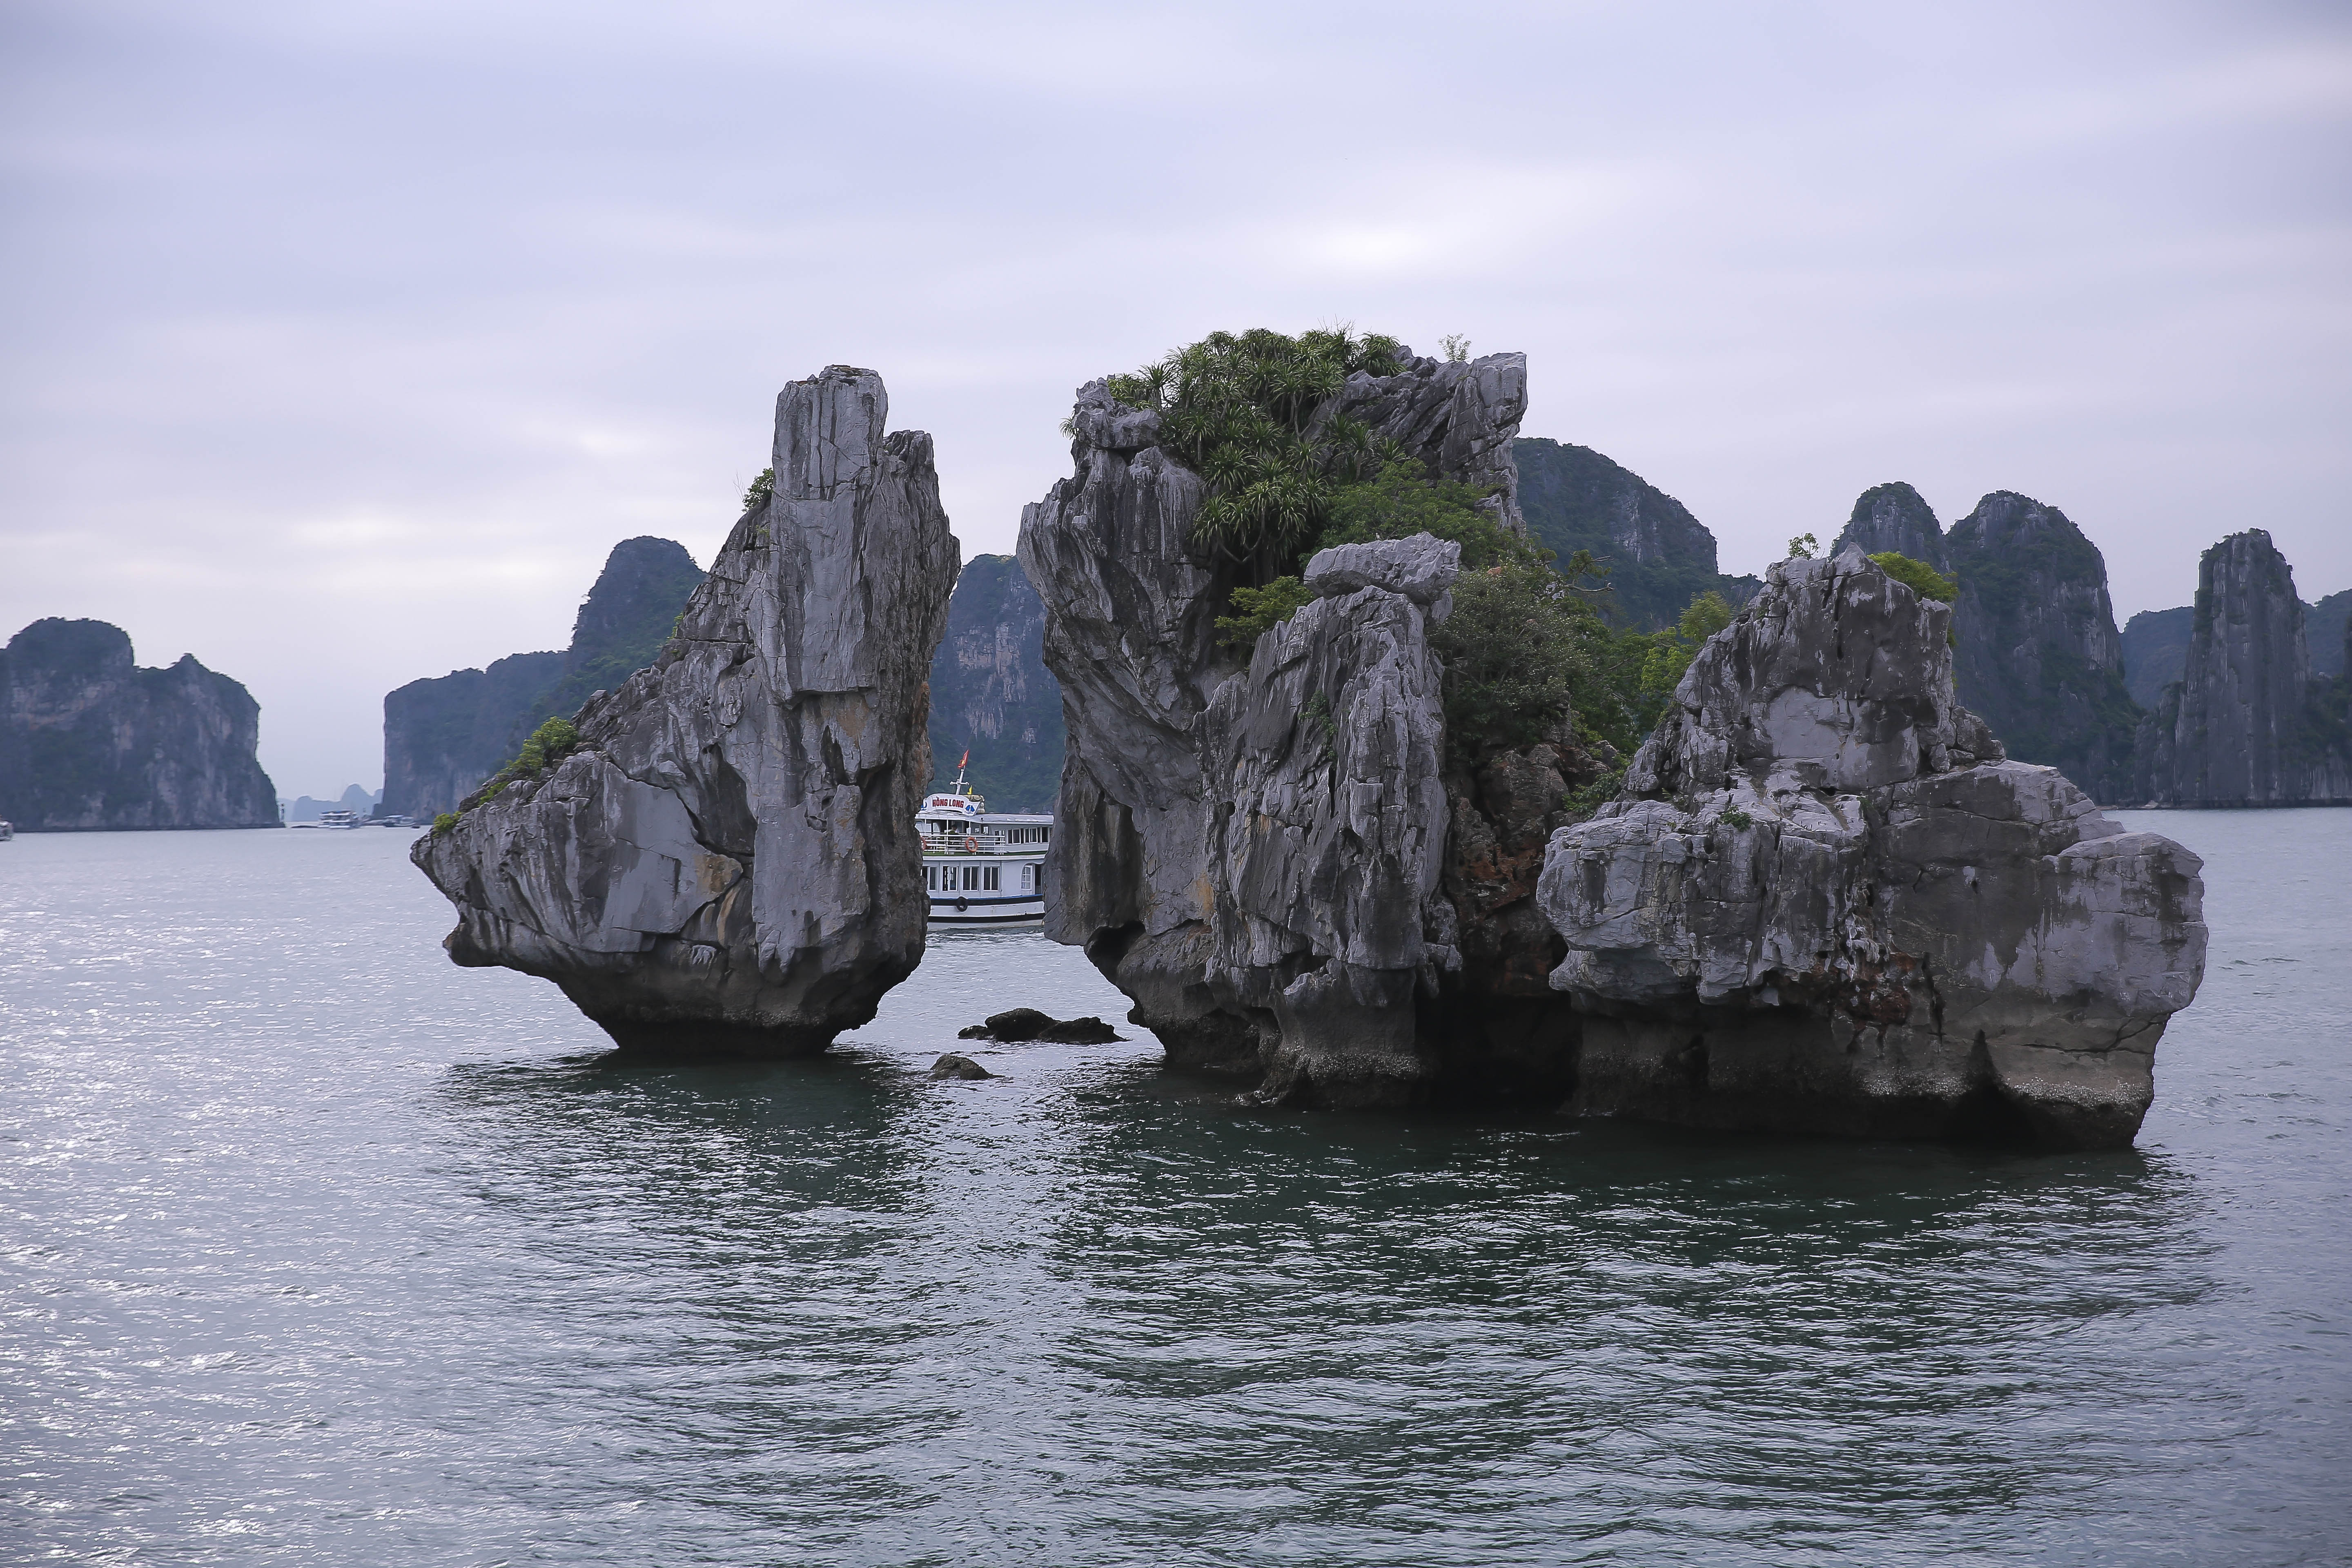 Trong Mai Islet has the shape of a cock couple rising from the blue sea. These two huge cocks have stood by the other for thousands of years. As the story told by the locals, Trong Mai Islet represents for faithfulness of love.